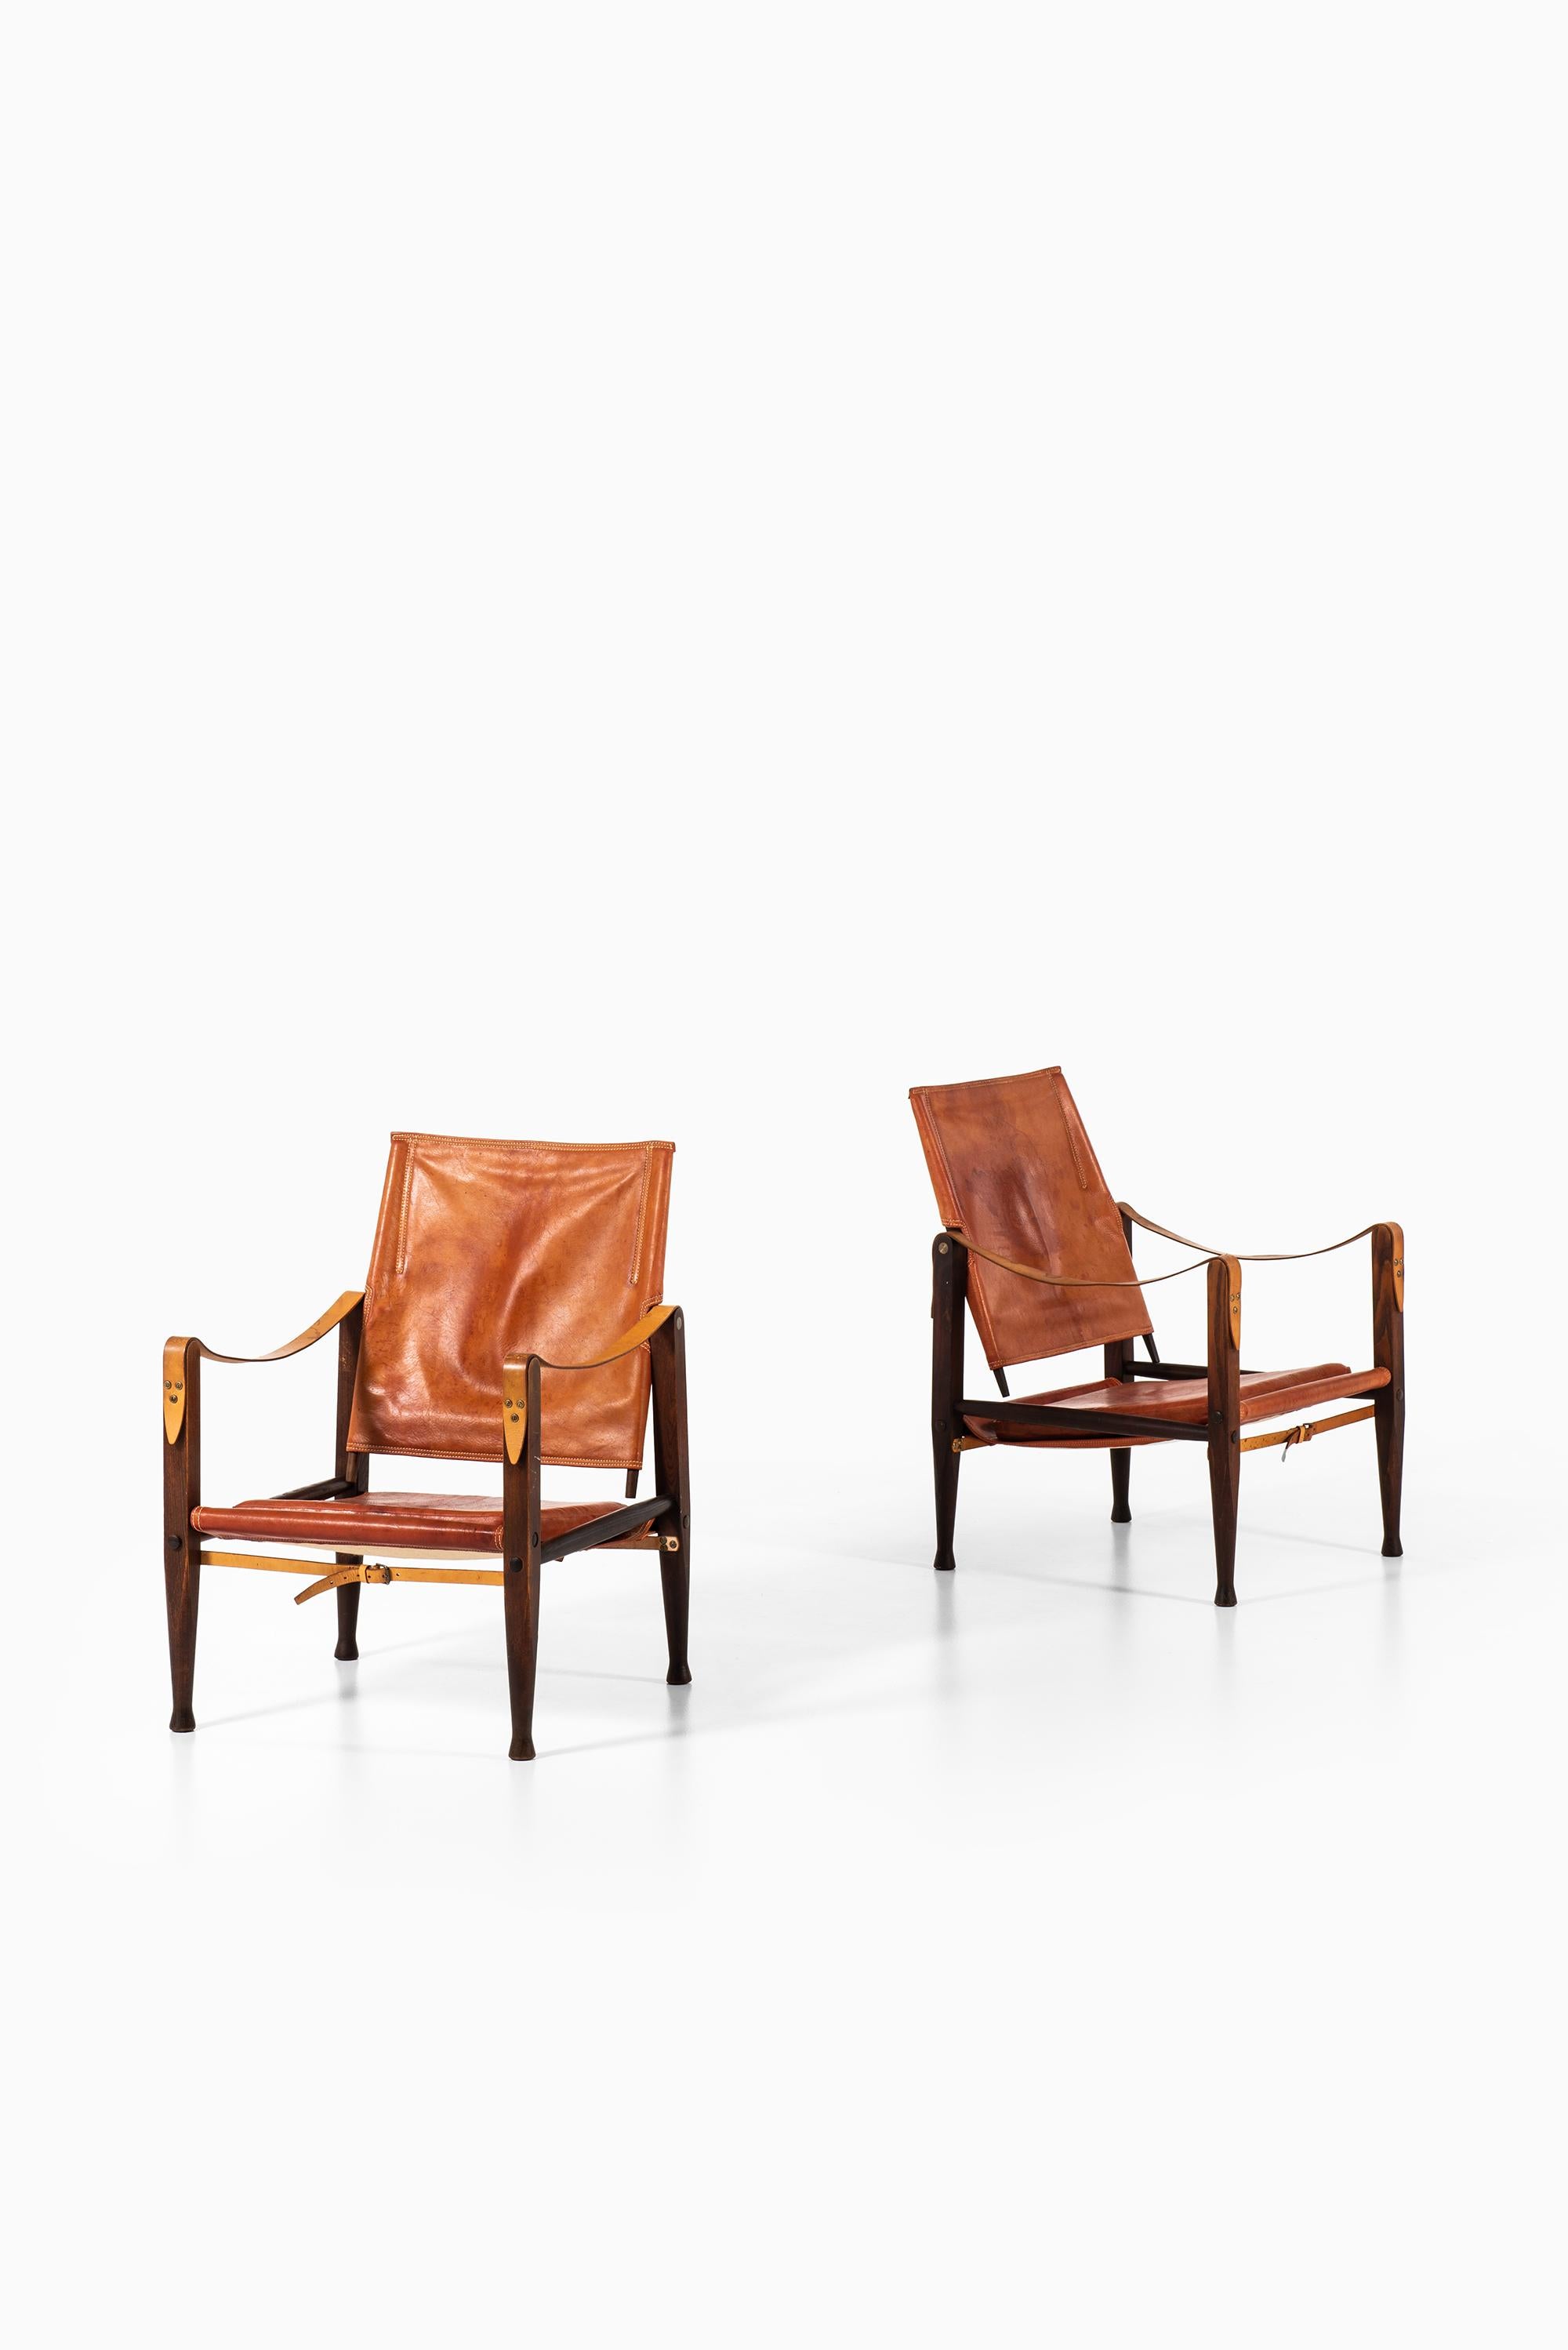 Rare pair of safari easy chairs designed by Kaare Klint. Produced by Rud Rasmussen in Denmark.